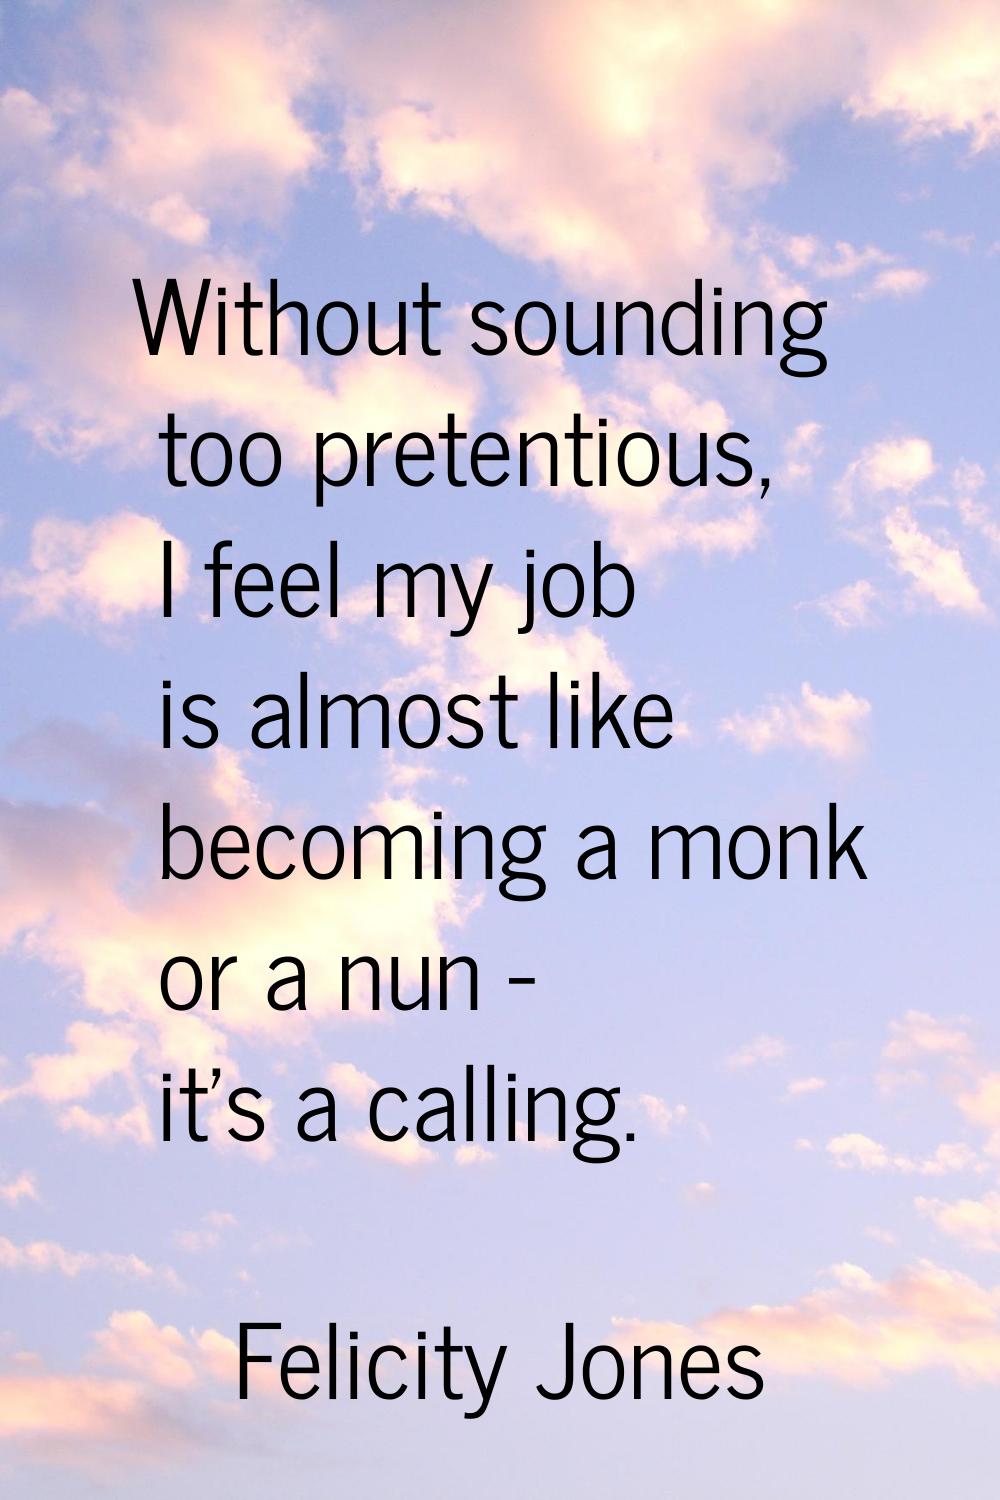 Without sounding too pretentious, I feel my job is almost like becoming a monk or a nun - it's a ca